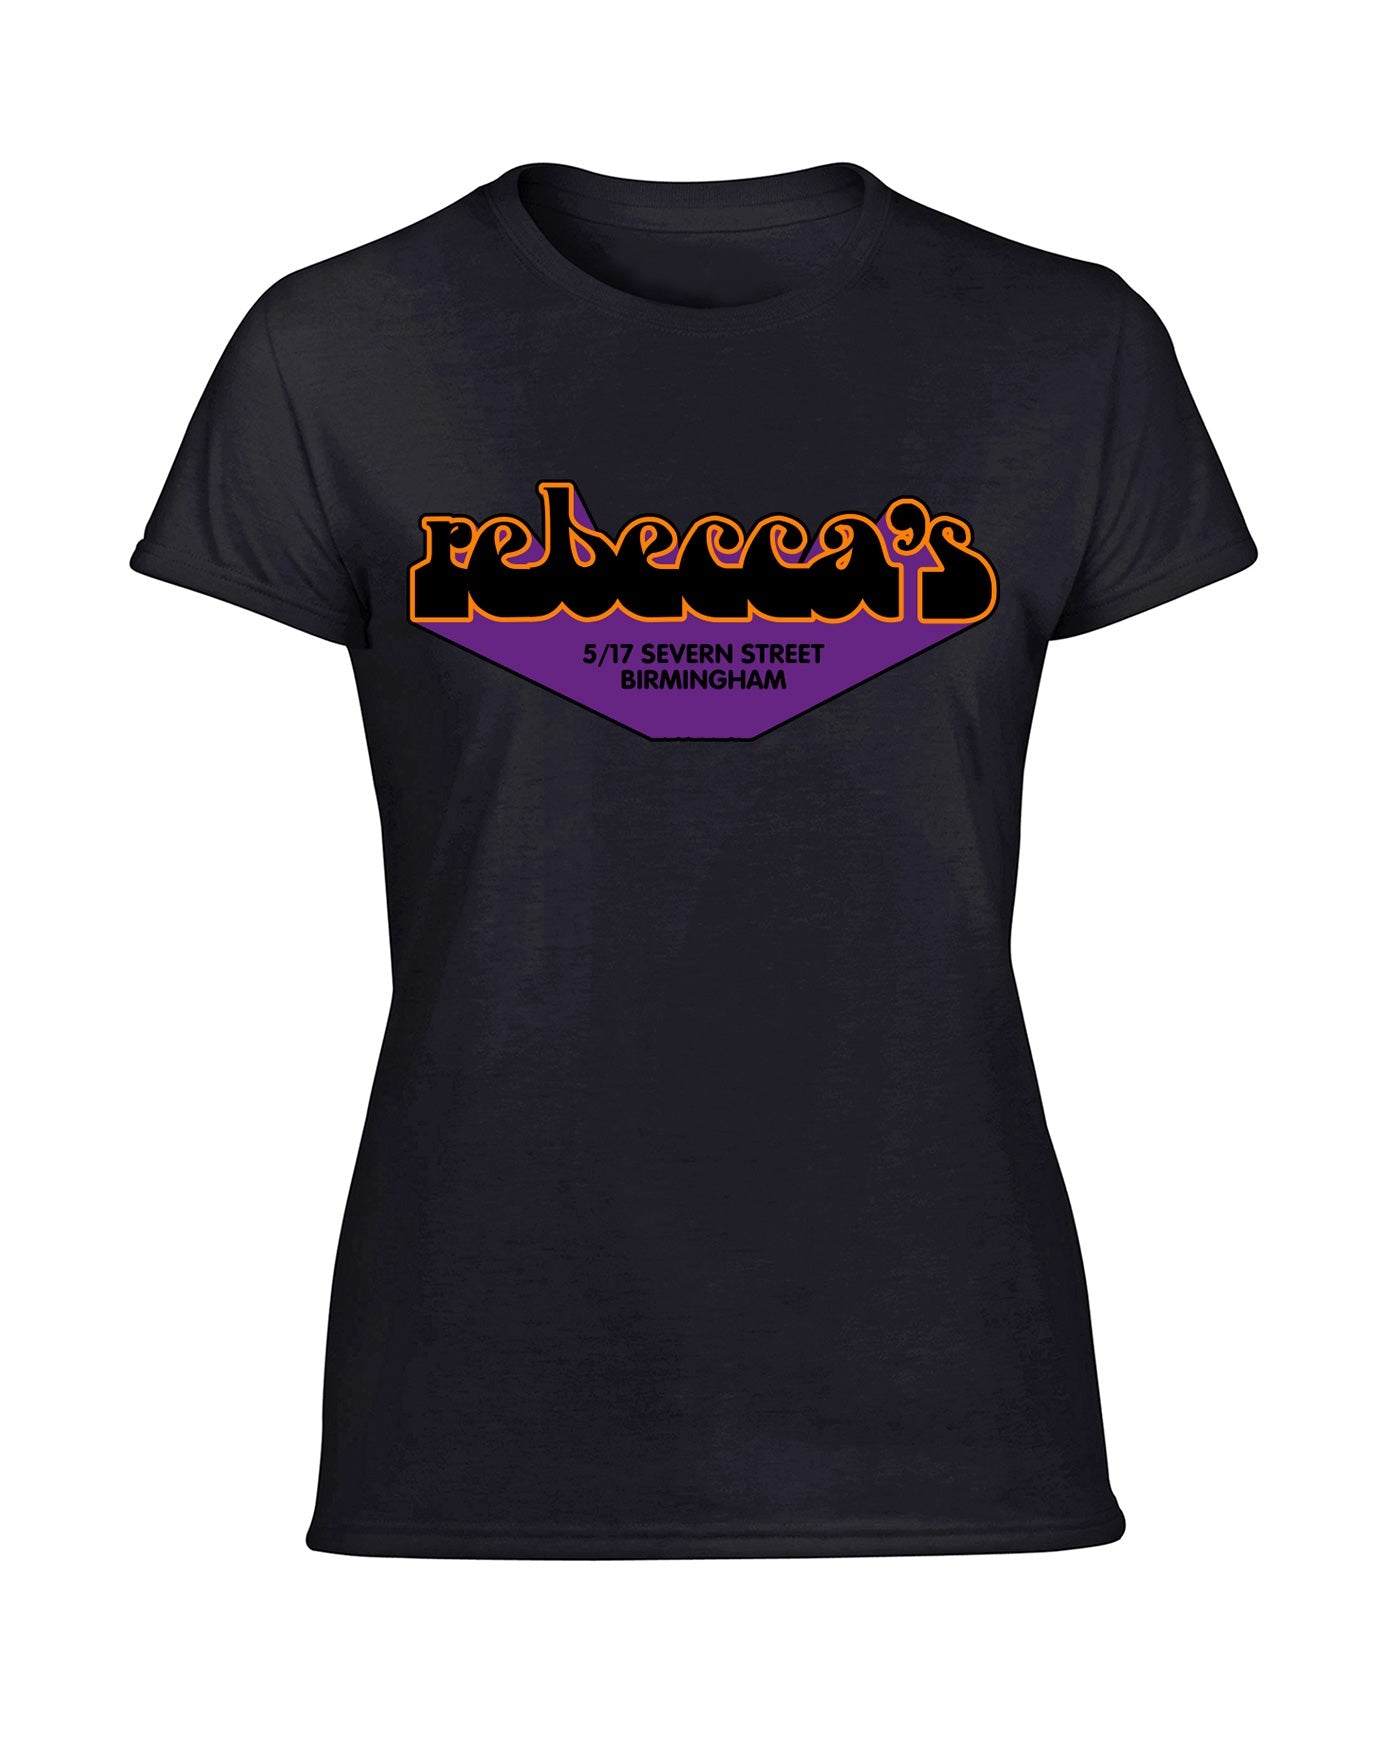 Rebecca's ladies fit T-shirt - various colours - Dirty Stop Outs